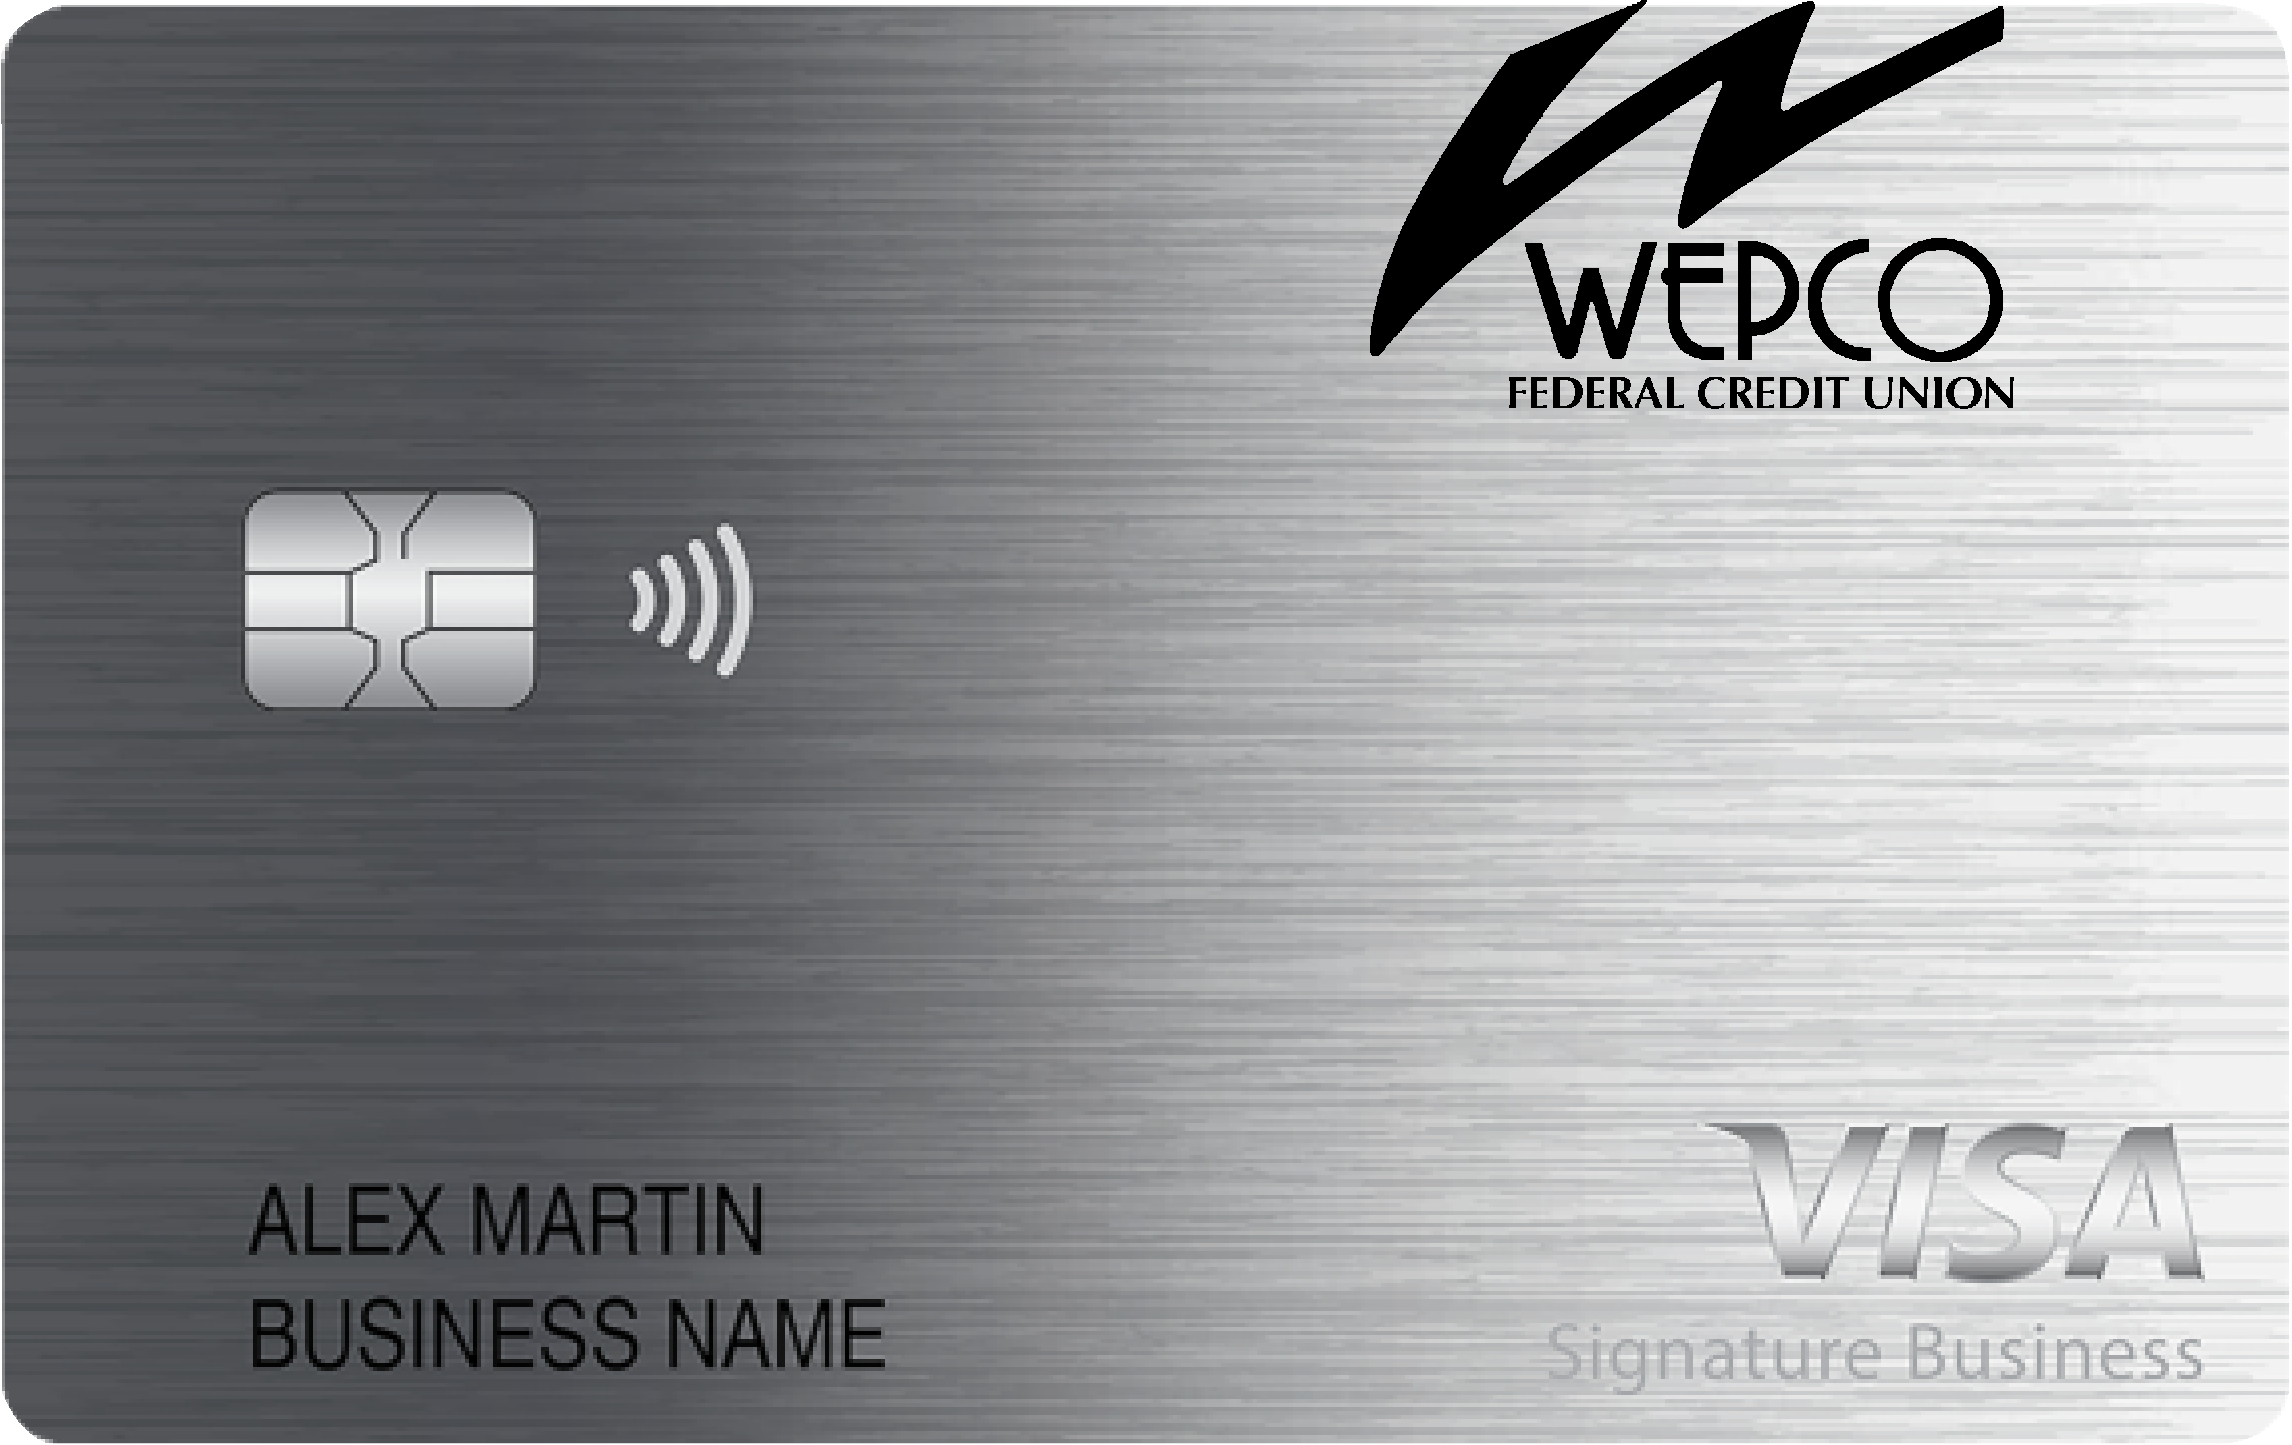 WEPCO Federal Credit Union Smart Business Rewards Card